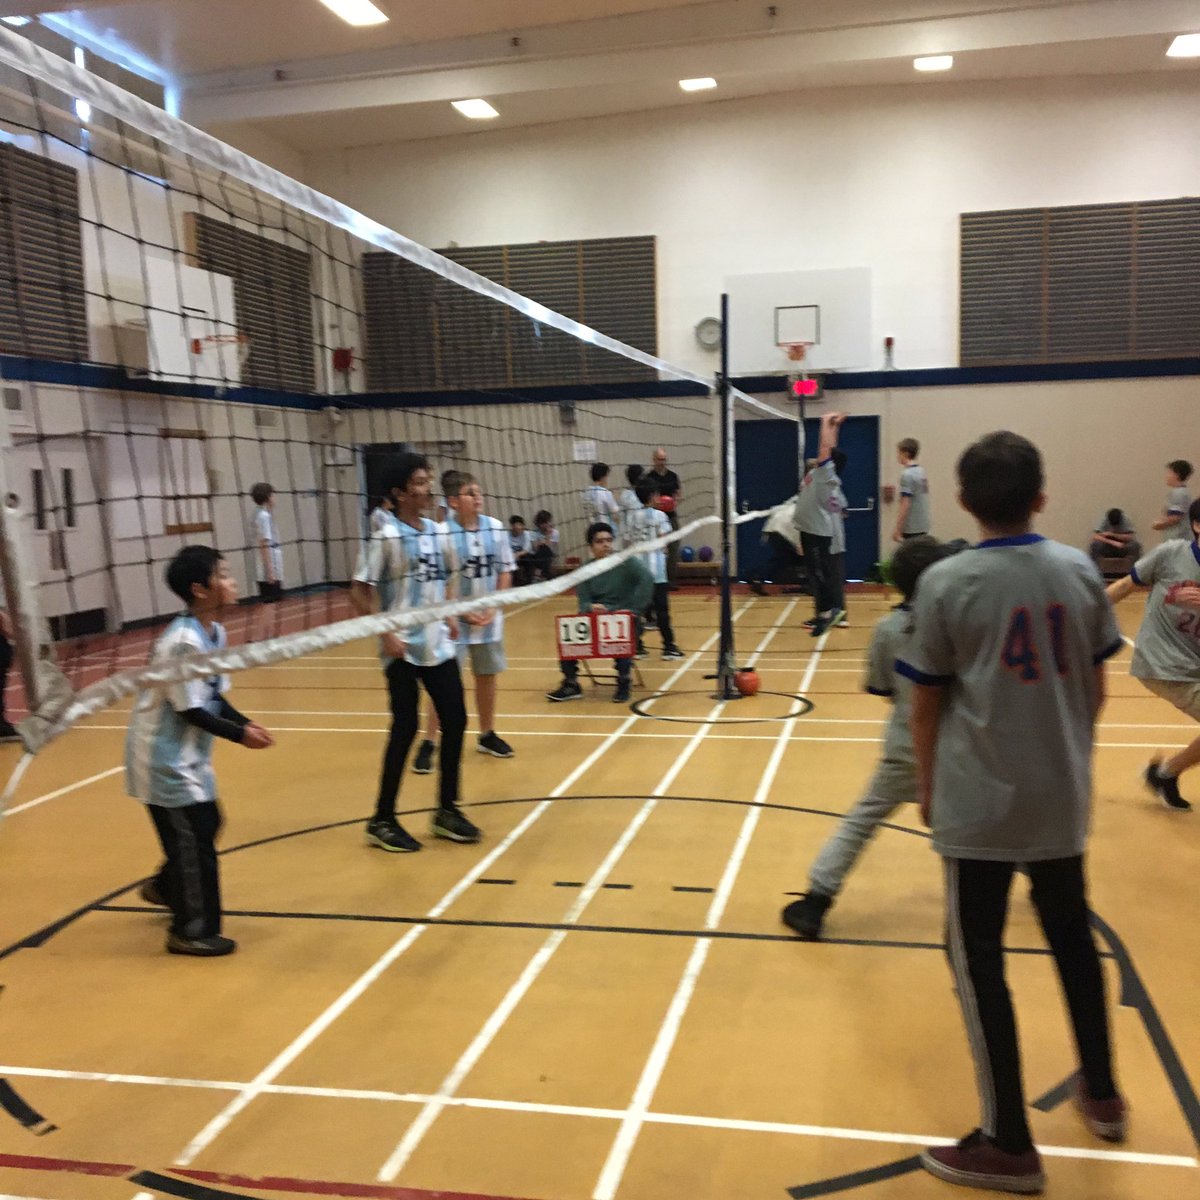 Solid playing by Hollyburn and Irwin Park Boys Volleyball teams! Teamwork, physical literacy and healthy competition? Yes! Way to go Huskies and Panthers! @JBWDaudlin @HollyburnElemen @WestVanSchools @MsEmilyMiller